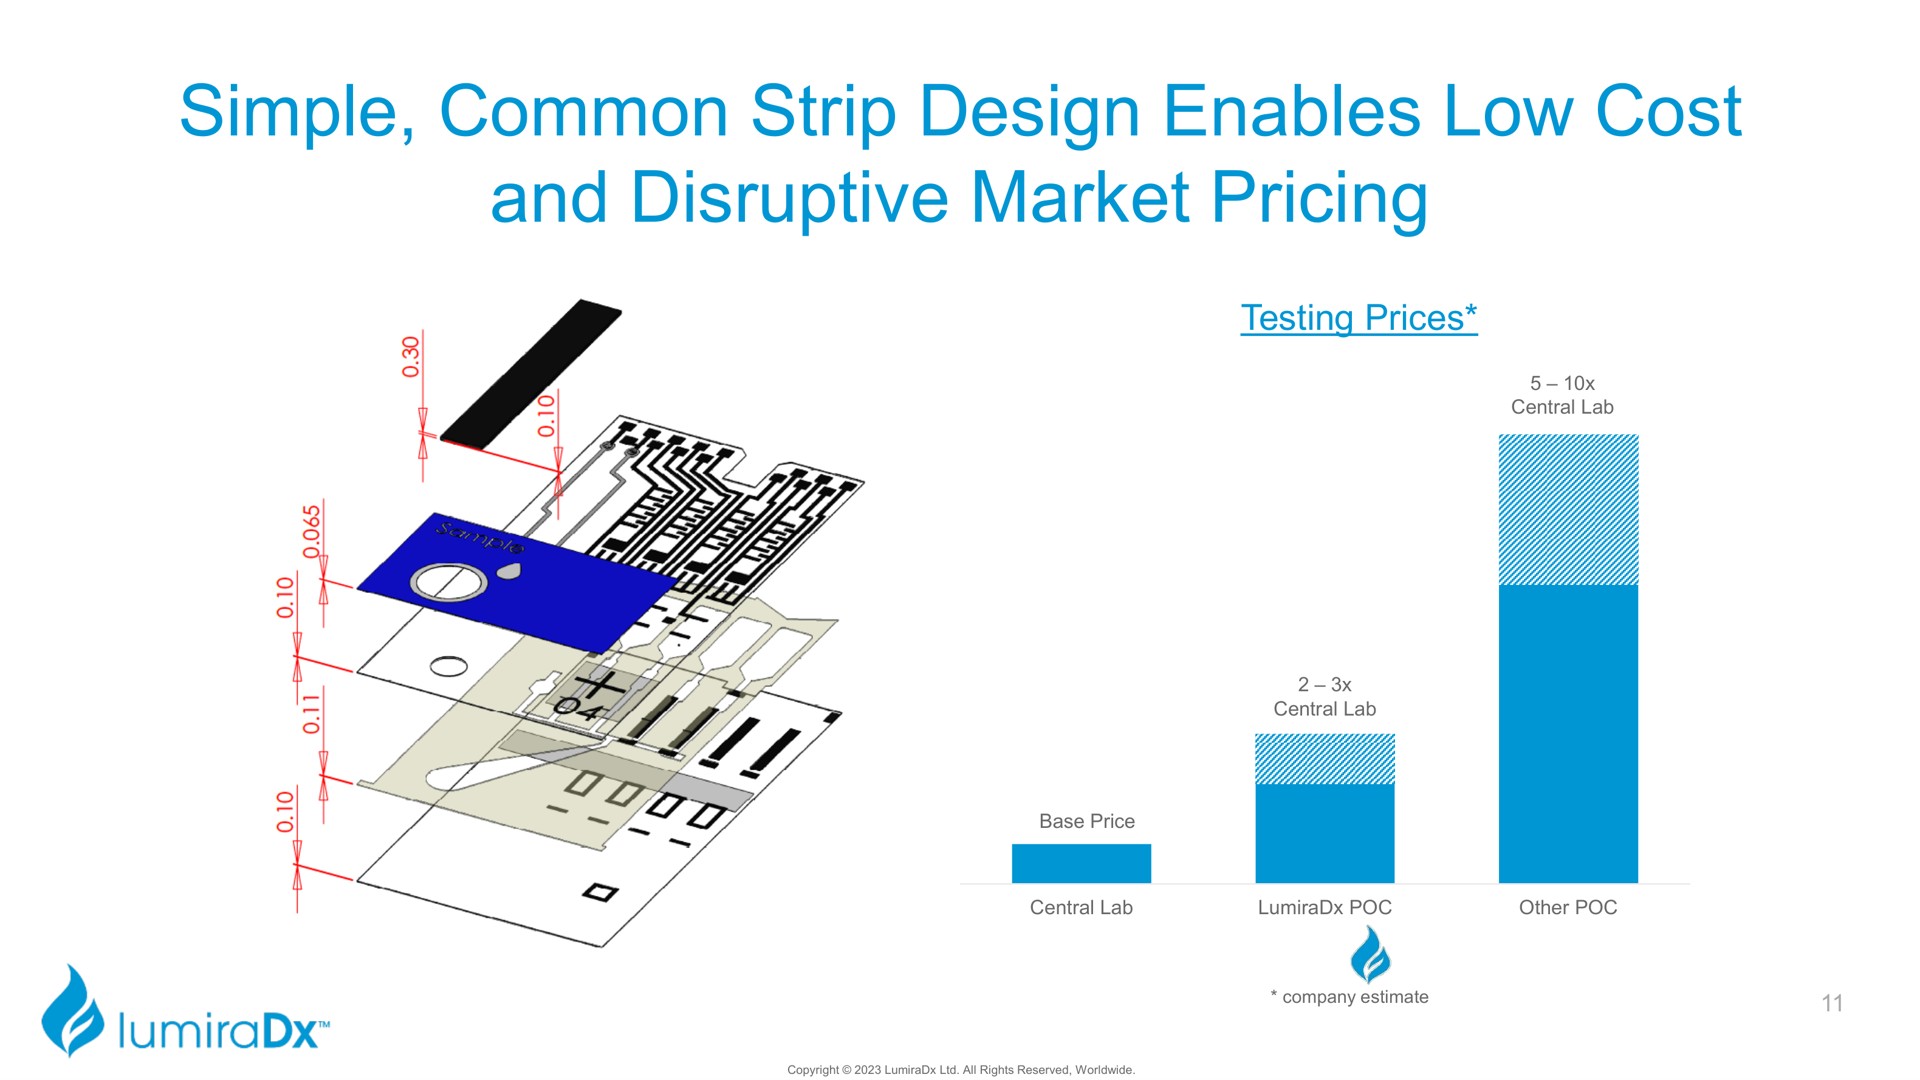 simple common strip design enables low cost and disruptive market pricing | LumiraDx